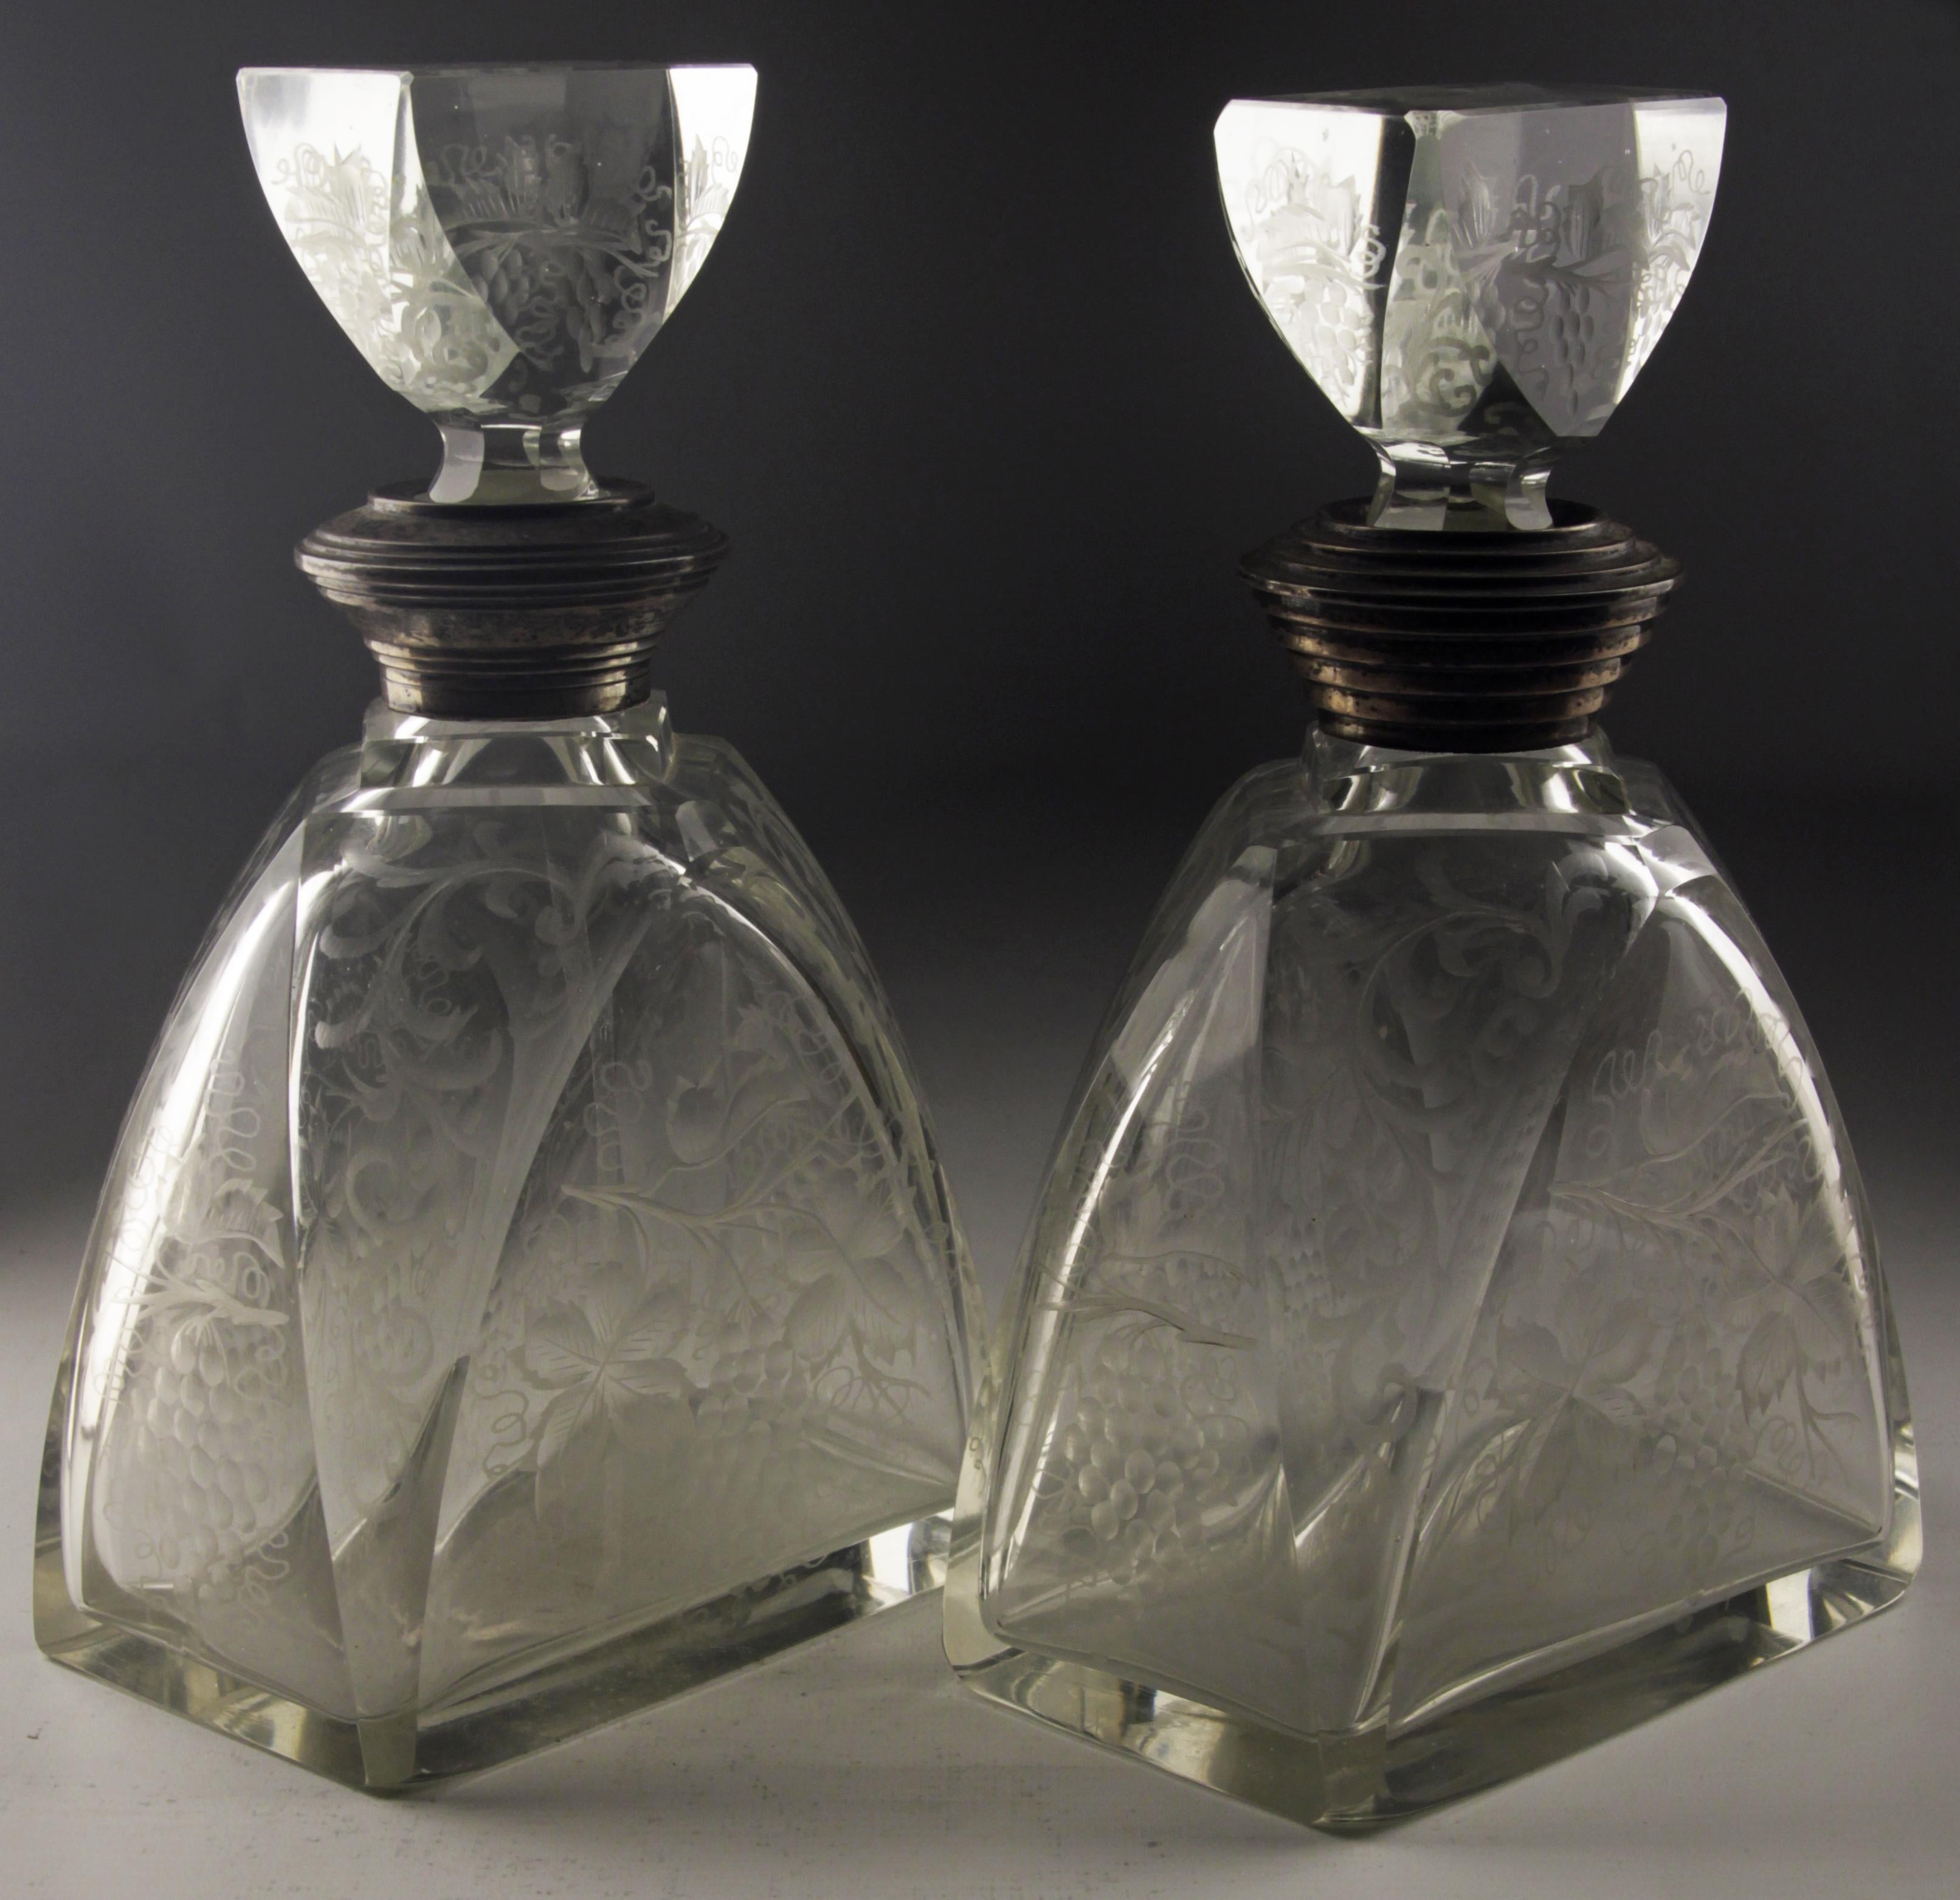 Pair of Art Déco Etched Glass Liquor Decanters with Sterling Silver Necks For Sale 2